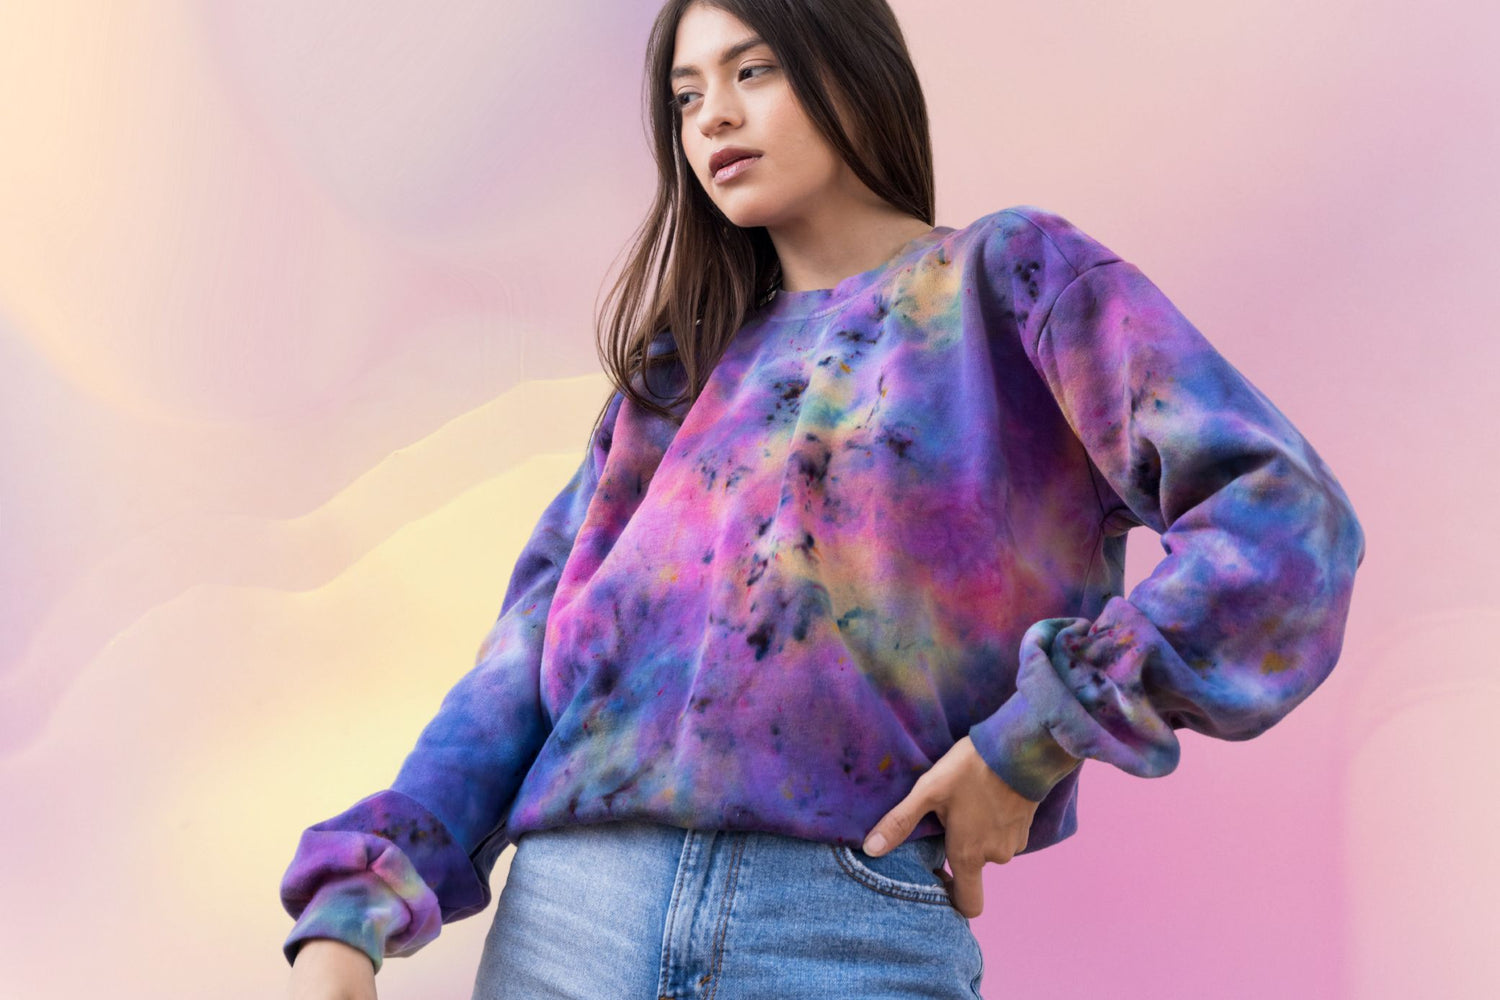 Vibrant, hand-dyed tie-dye sweatshirt radiating a rainbow of colors - a unique blend of comfort and creativity. Make your style statement with this wearable work of art!